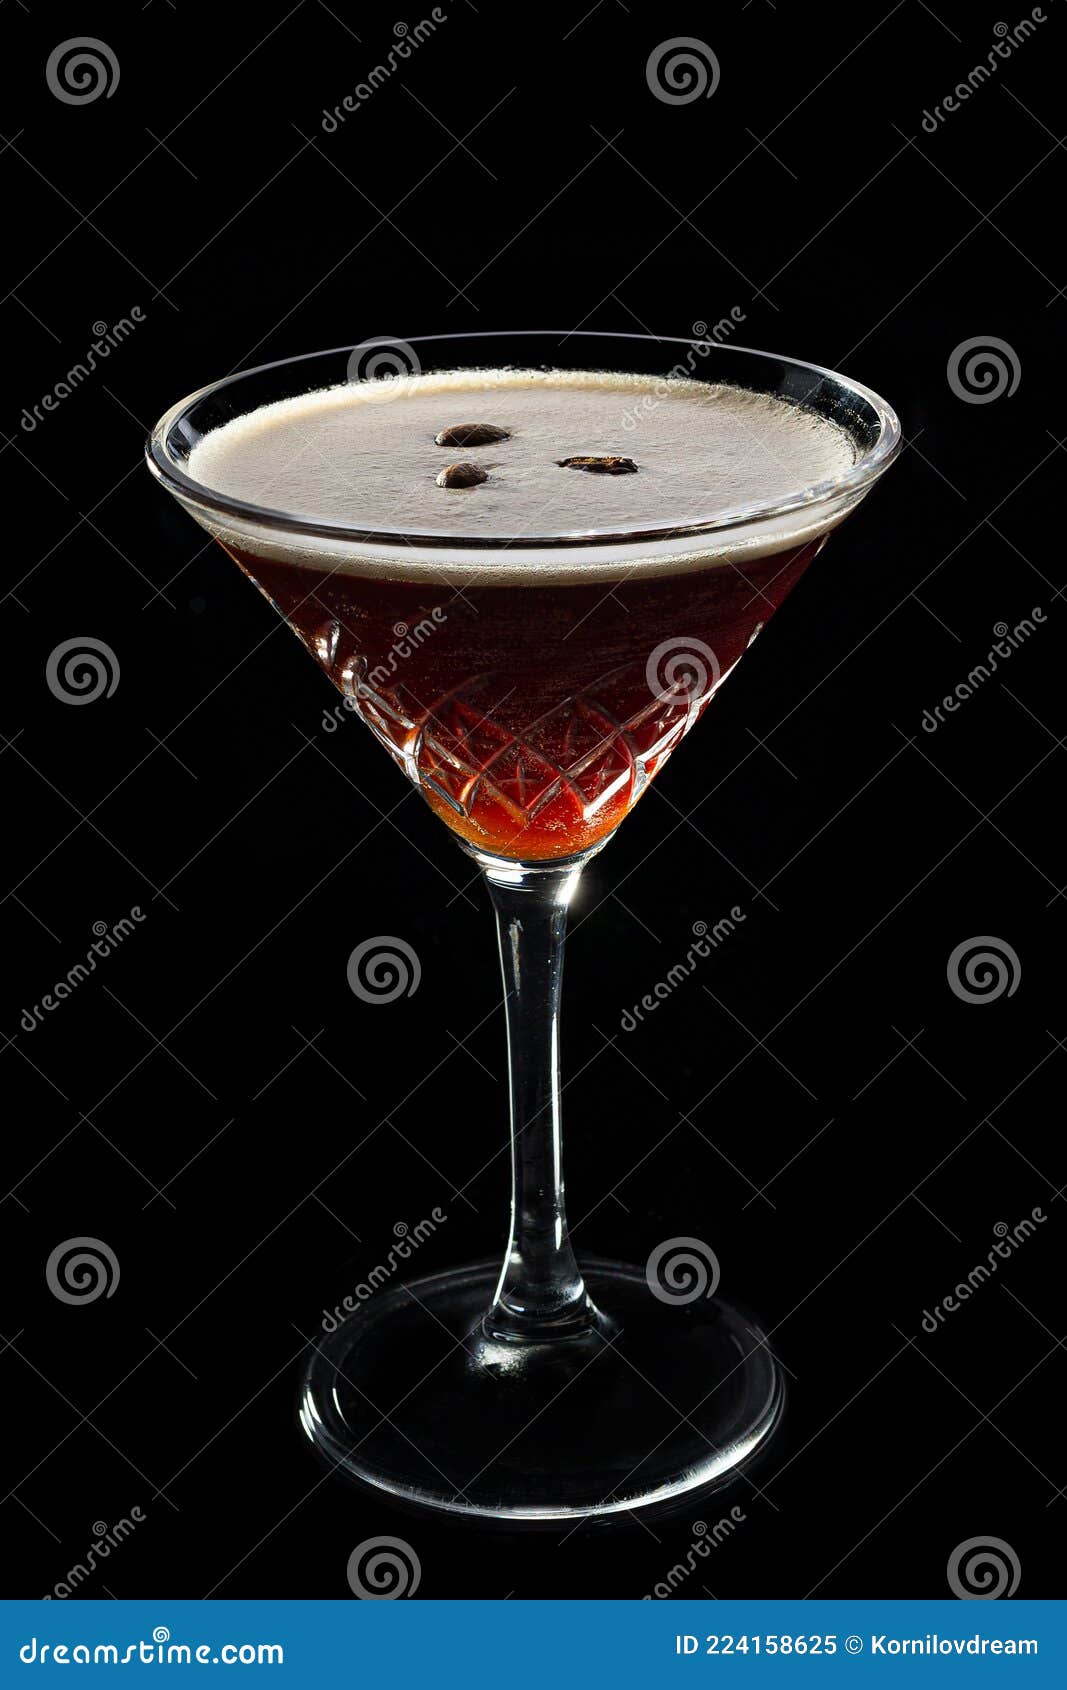 alcohol cocktail espresso martini cocktails garnished with coffee beans on black background.